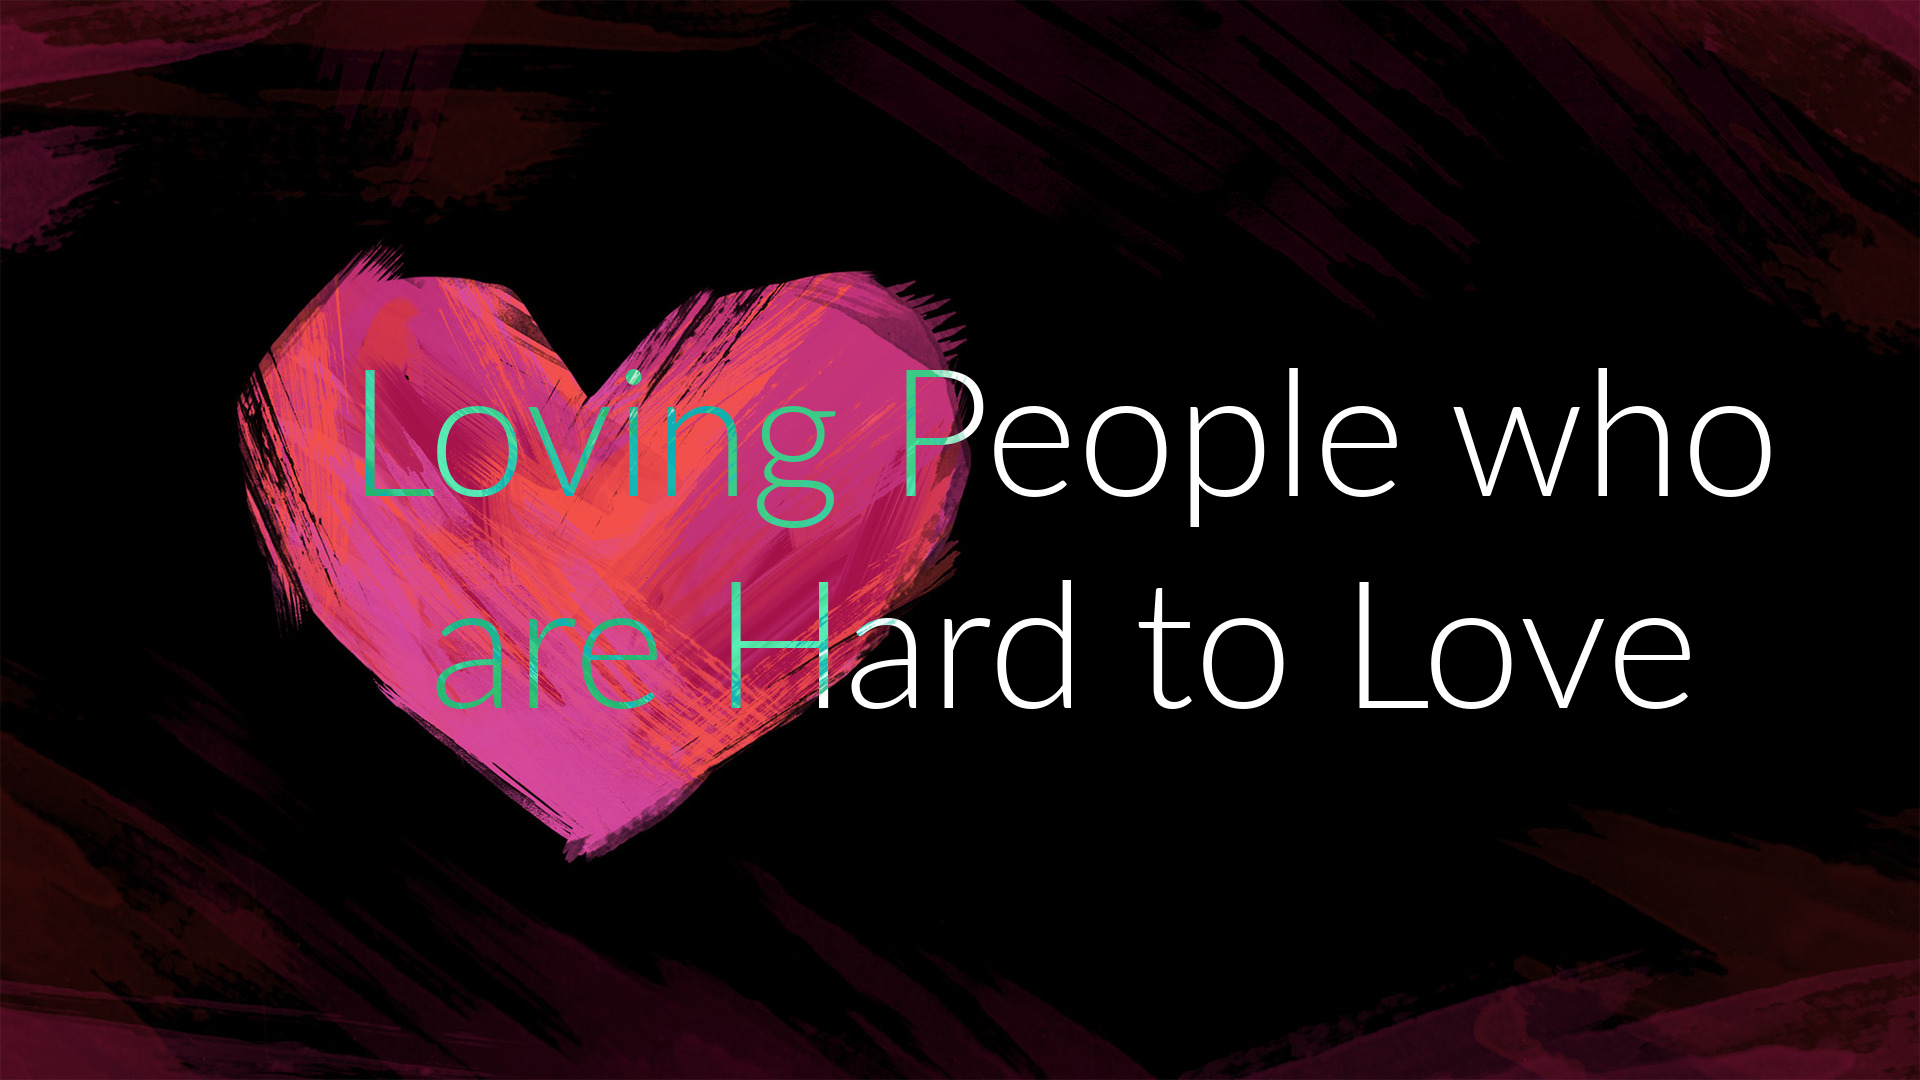 Loving People Who are Hard to Love